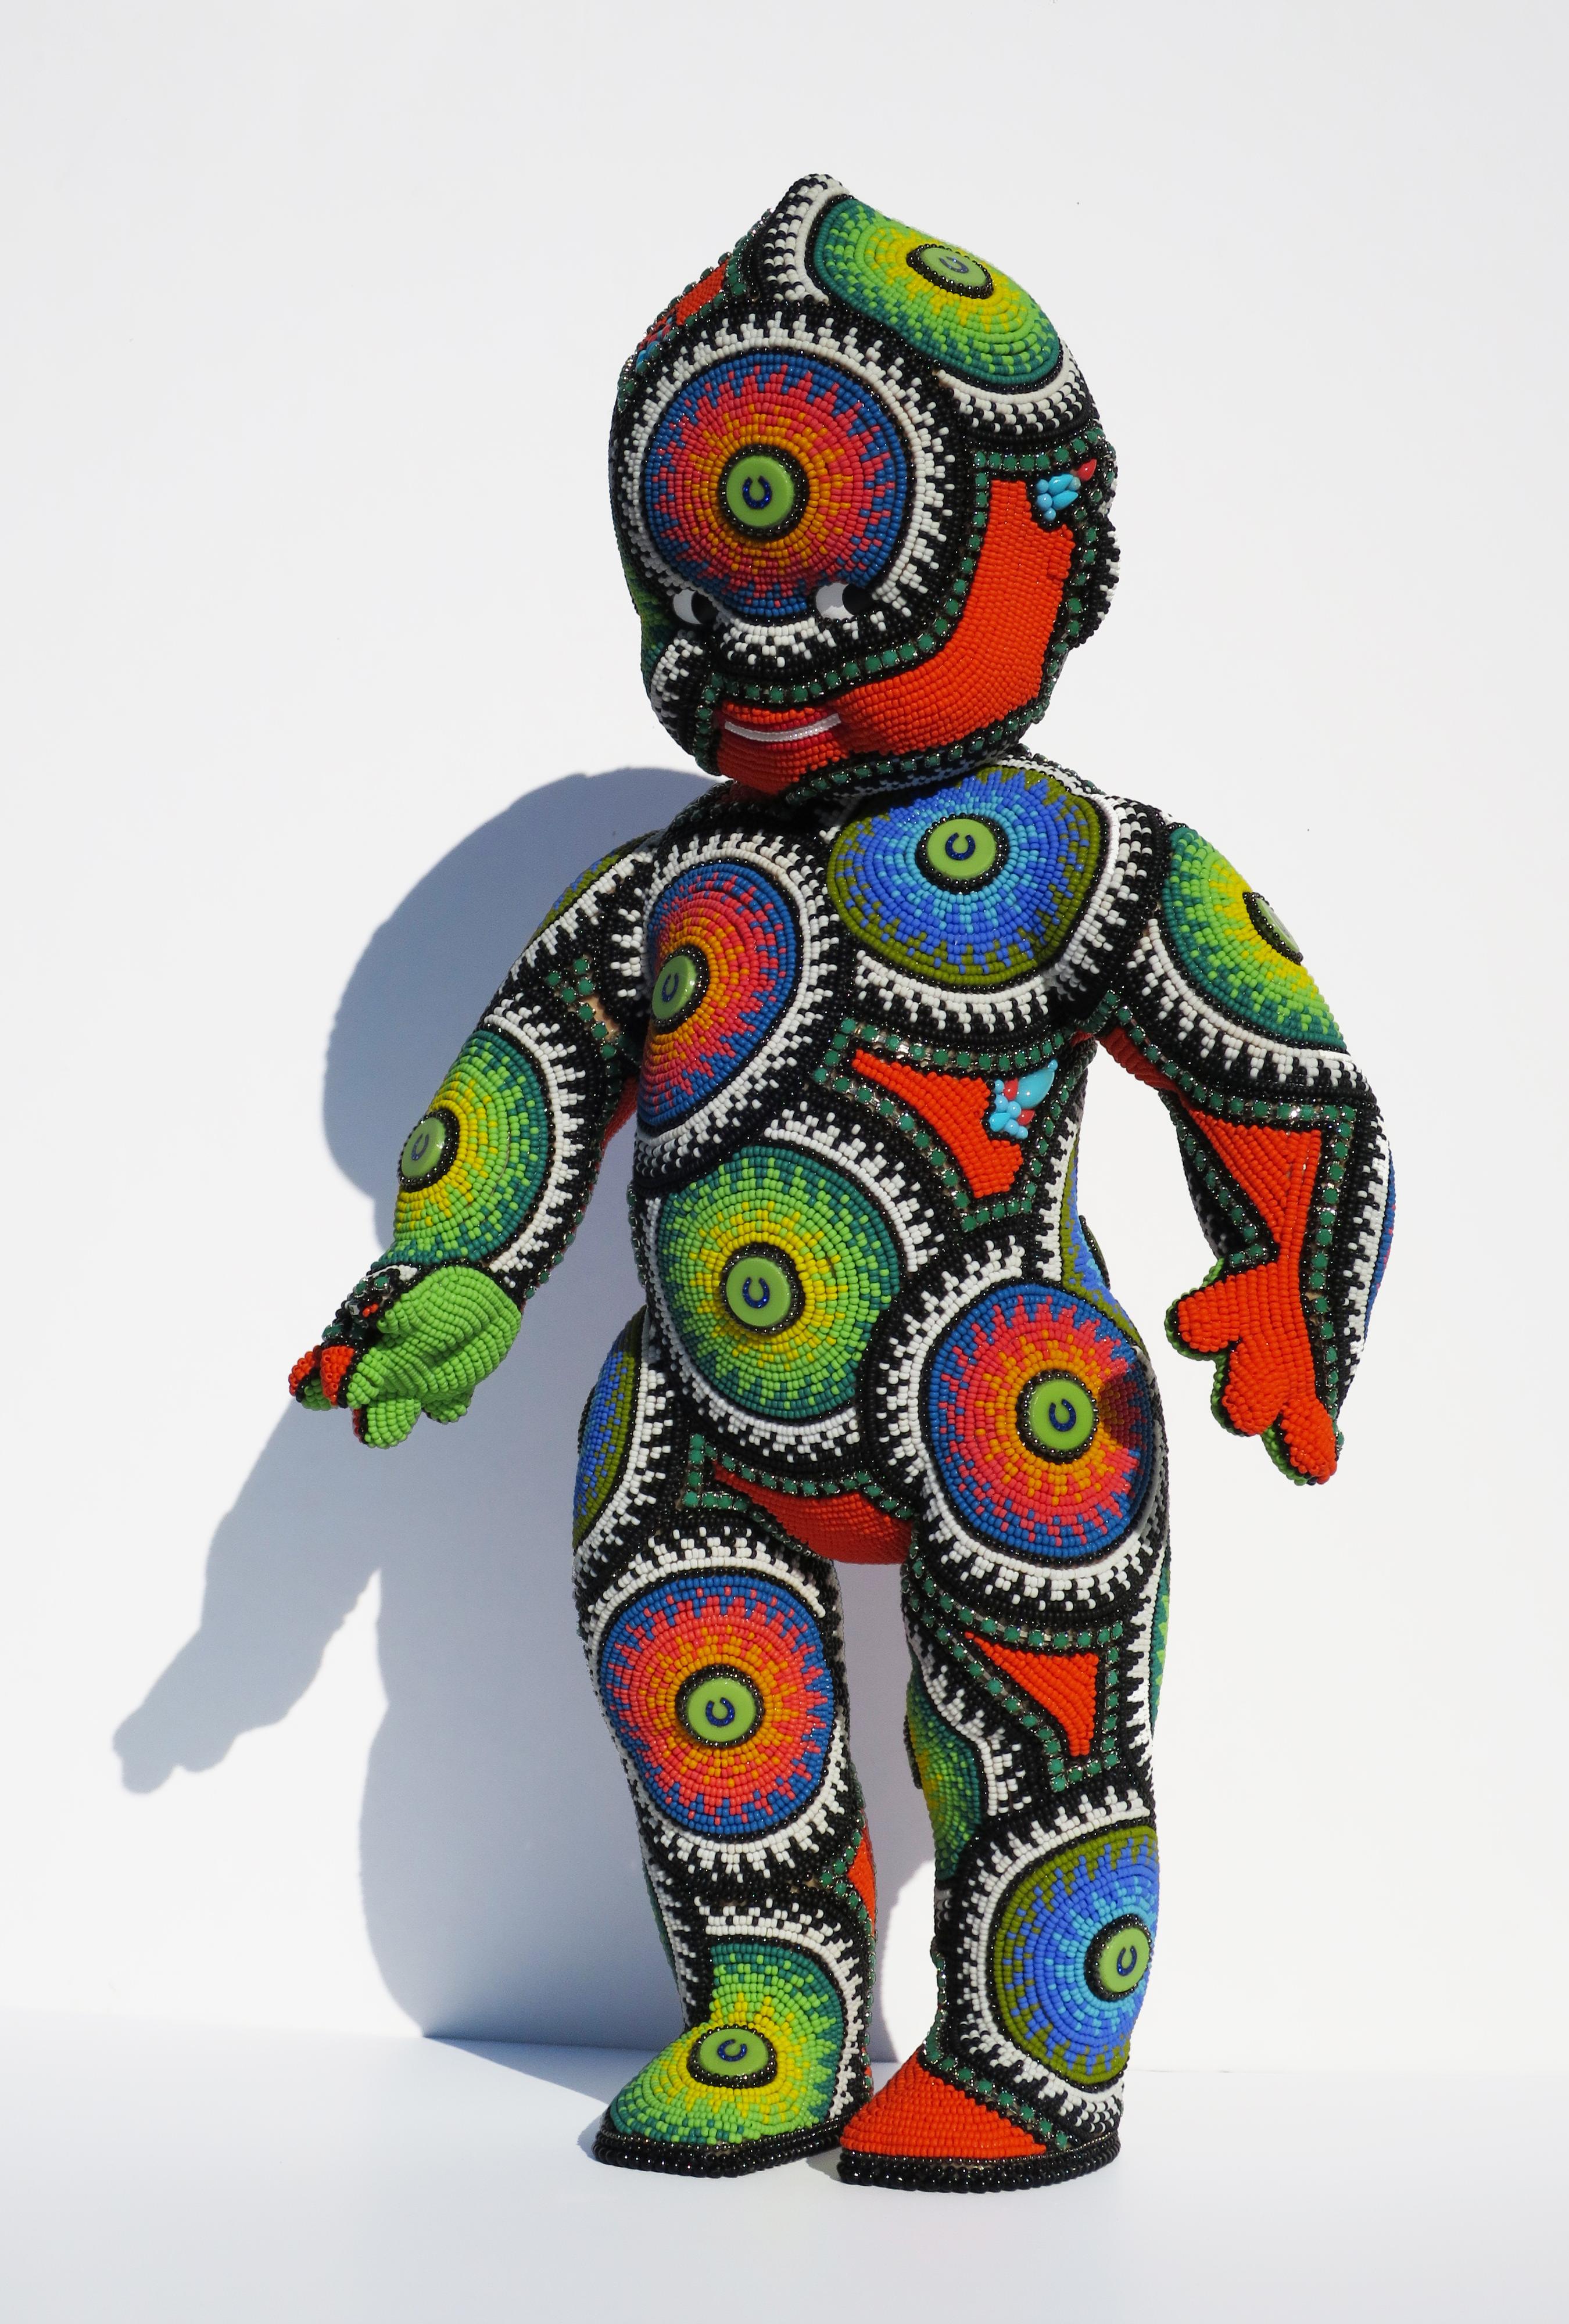 Jan Huling Abstract Sculpture - "Cheshire", Contemporary, Mixed Media, Sculpture, Glass Beads, Vintage Doll